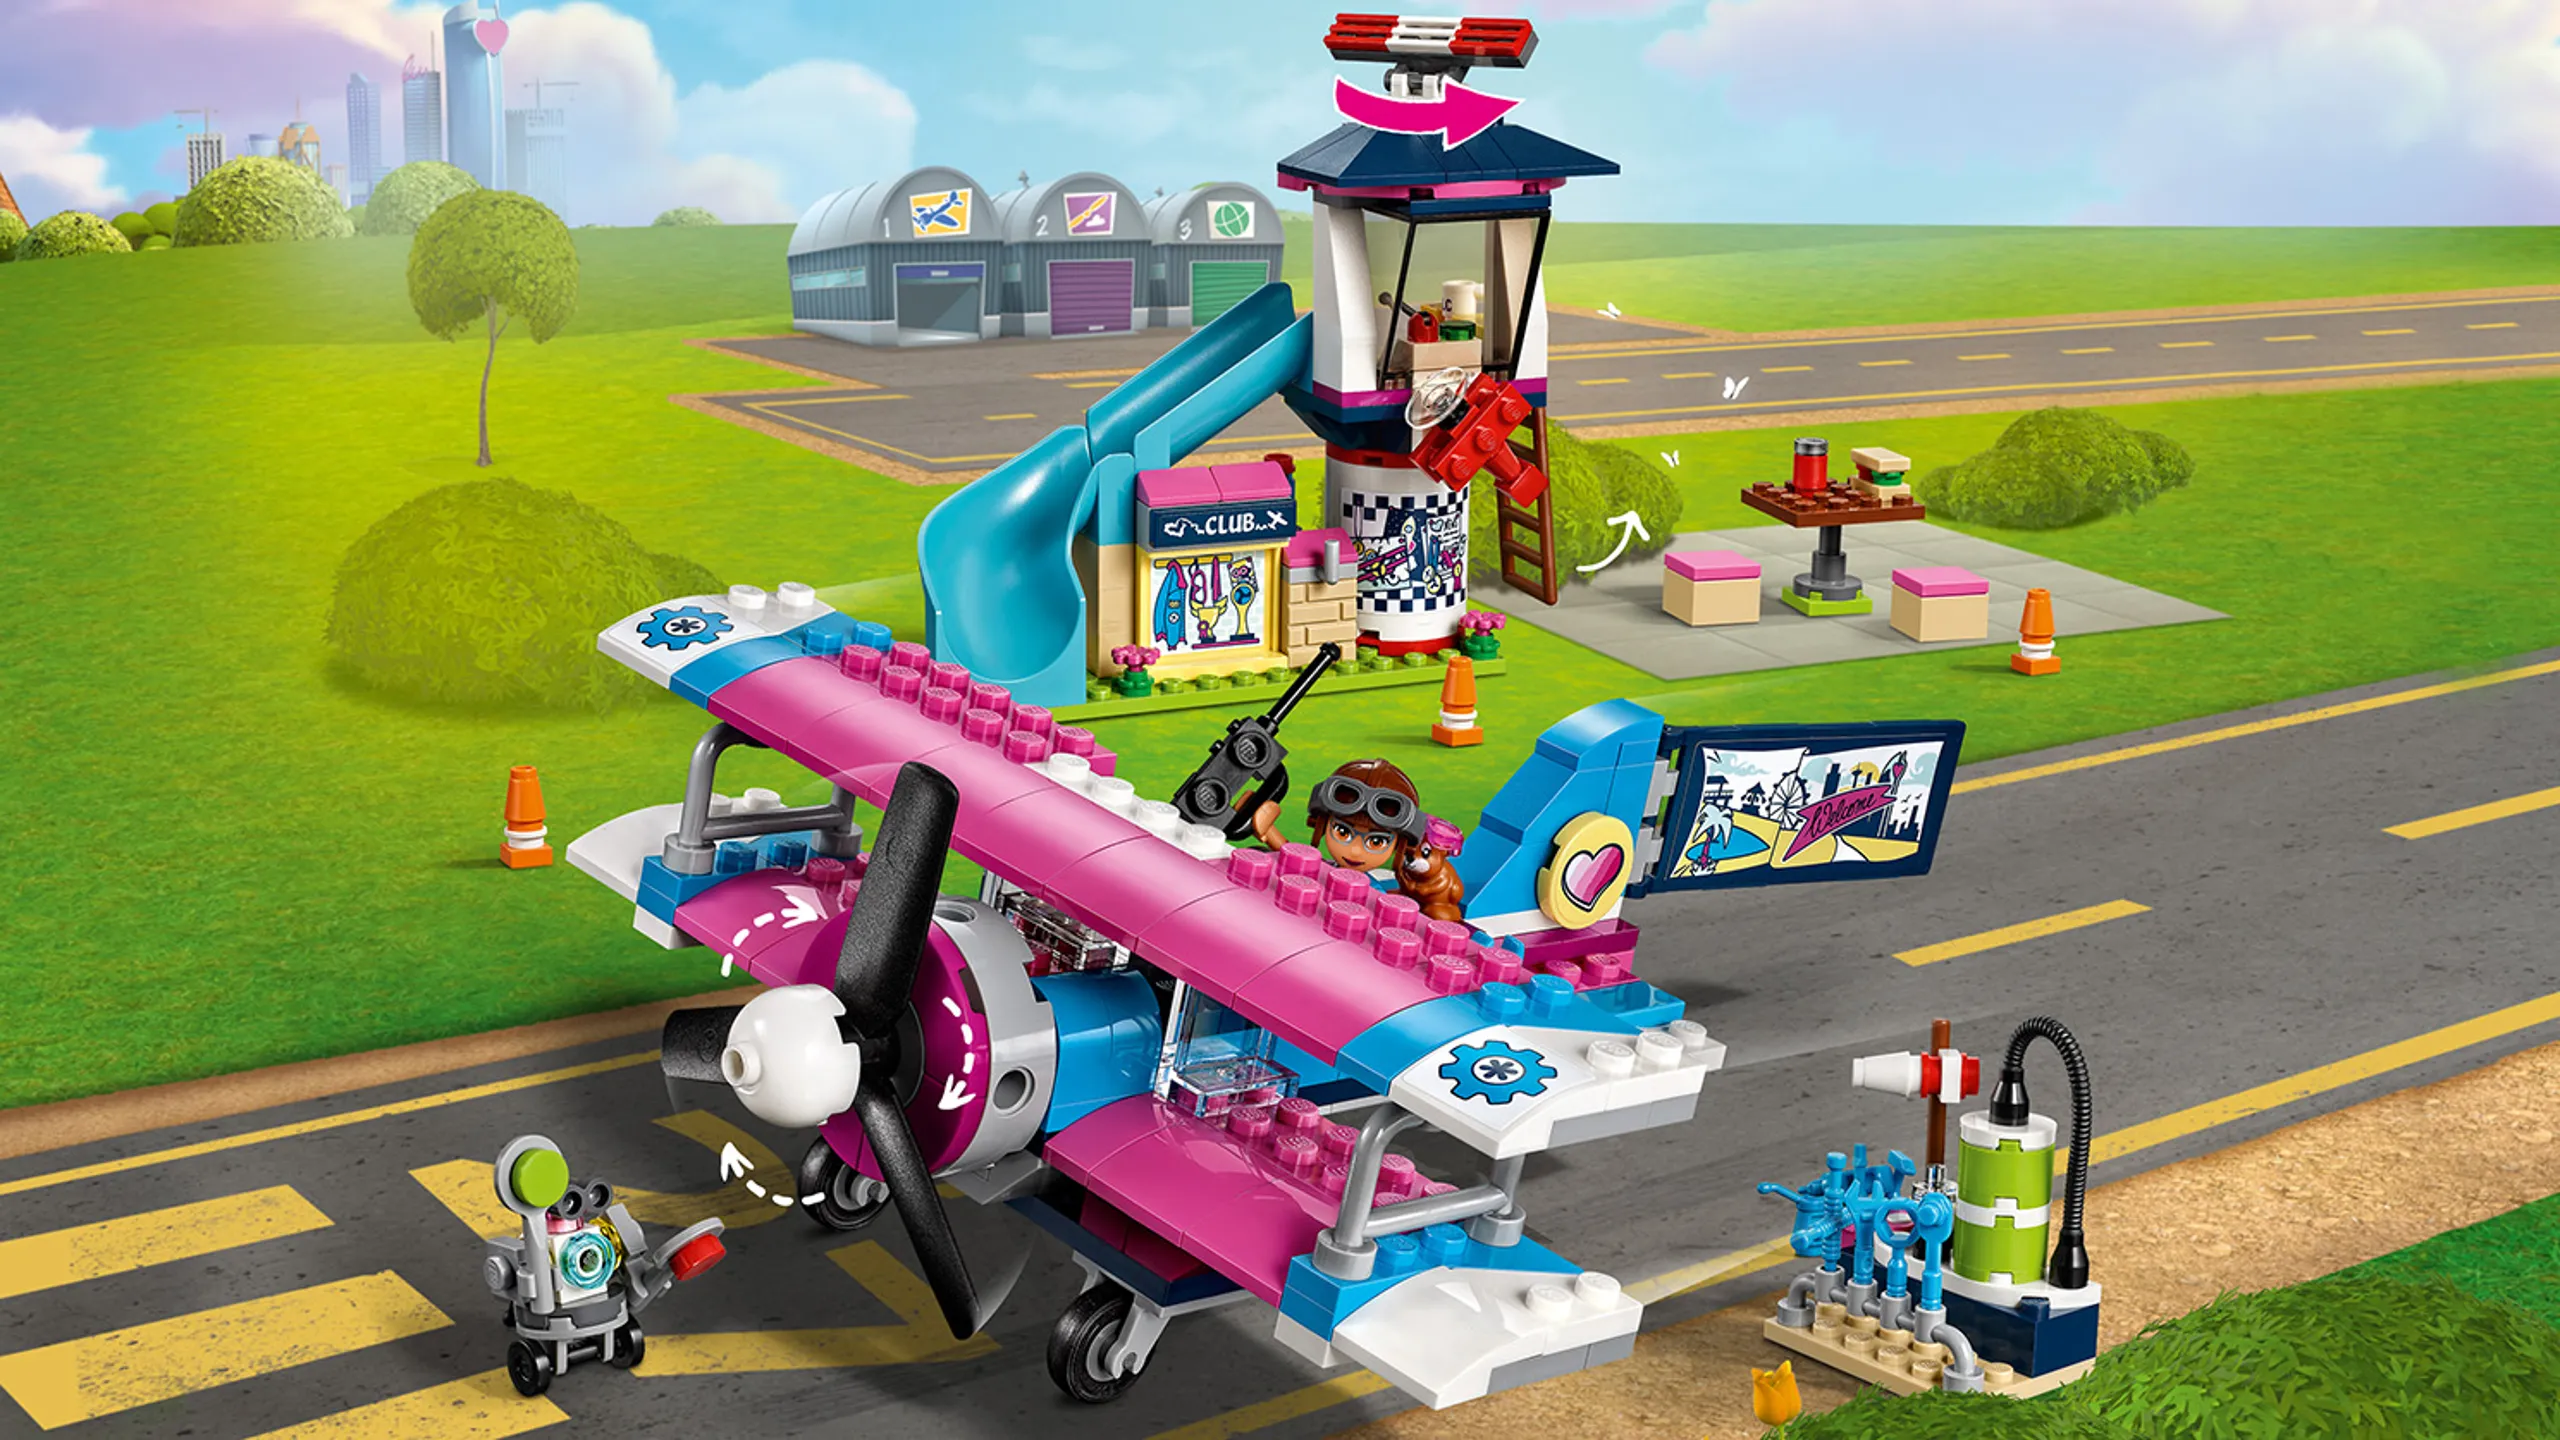 LEGO Friends - 41343 Heartlake City Airplane Tour - Fly over Heartlake City with Olivia, her robot and her hamster and tour the city from air.